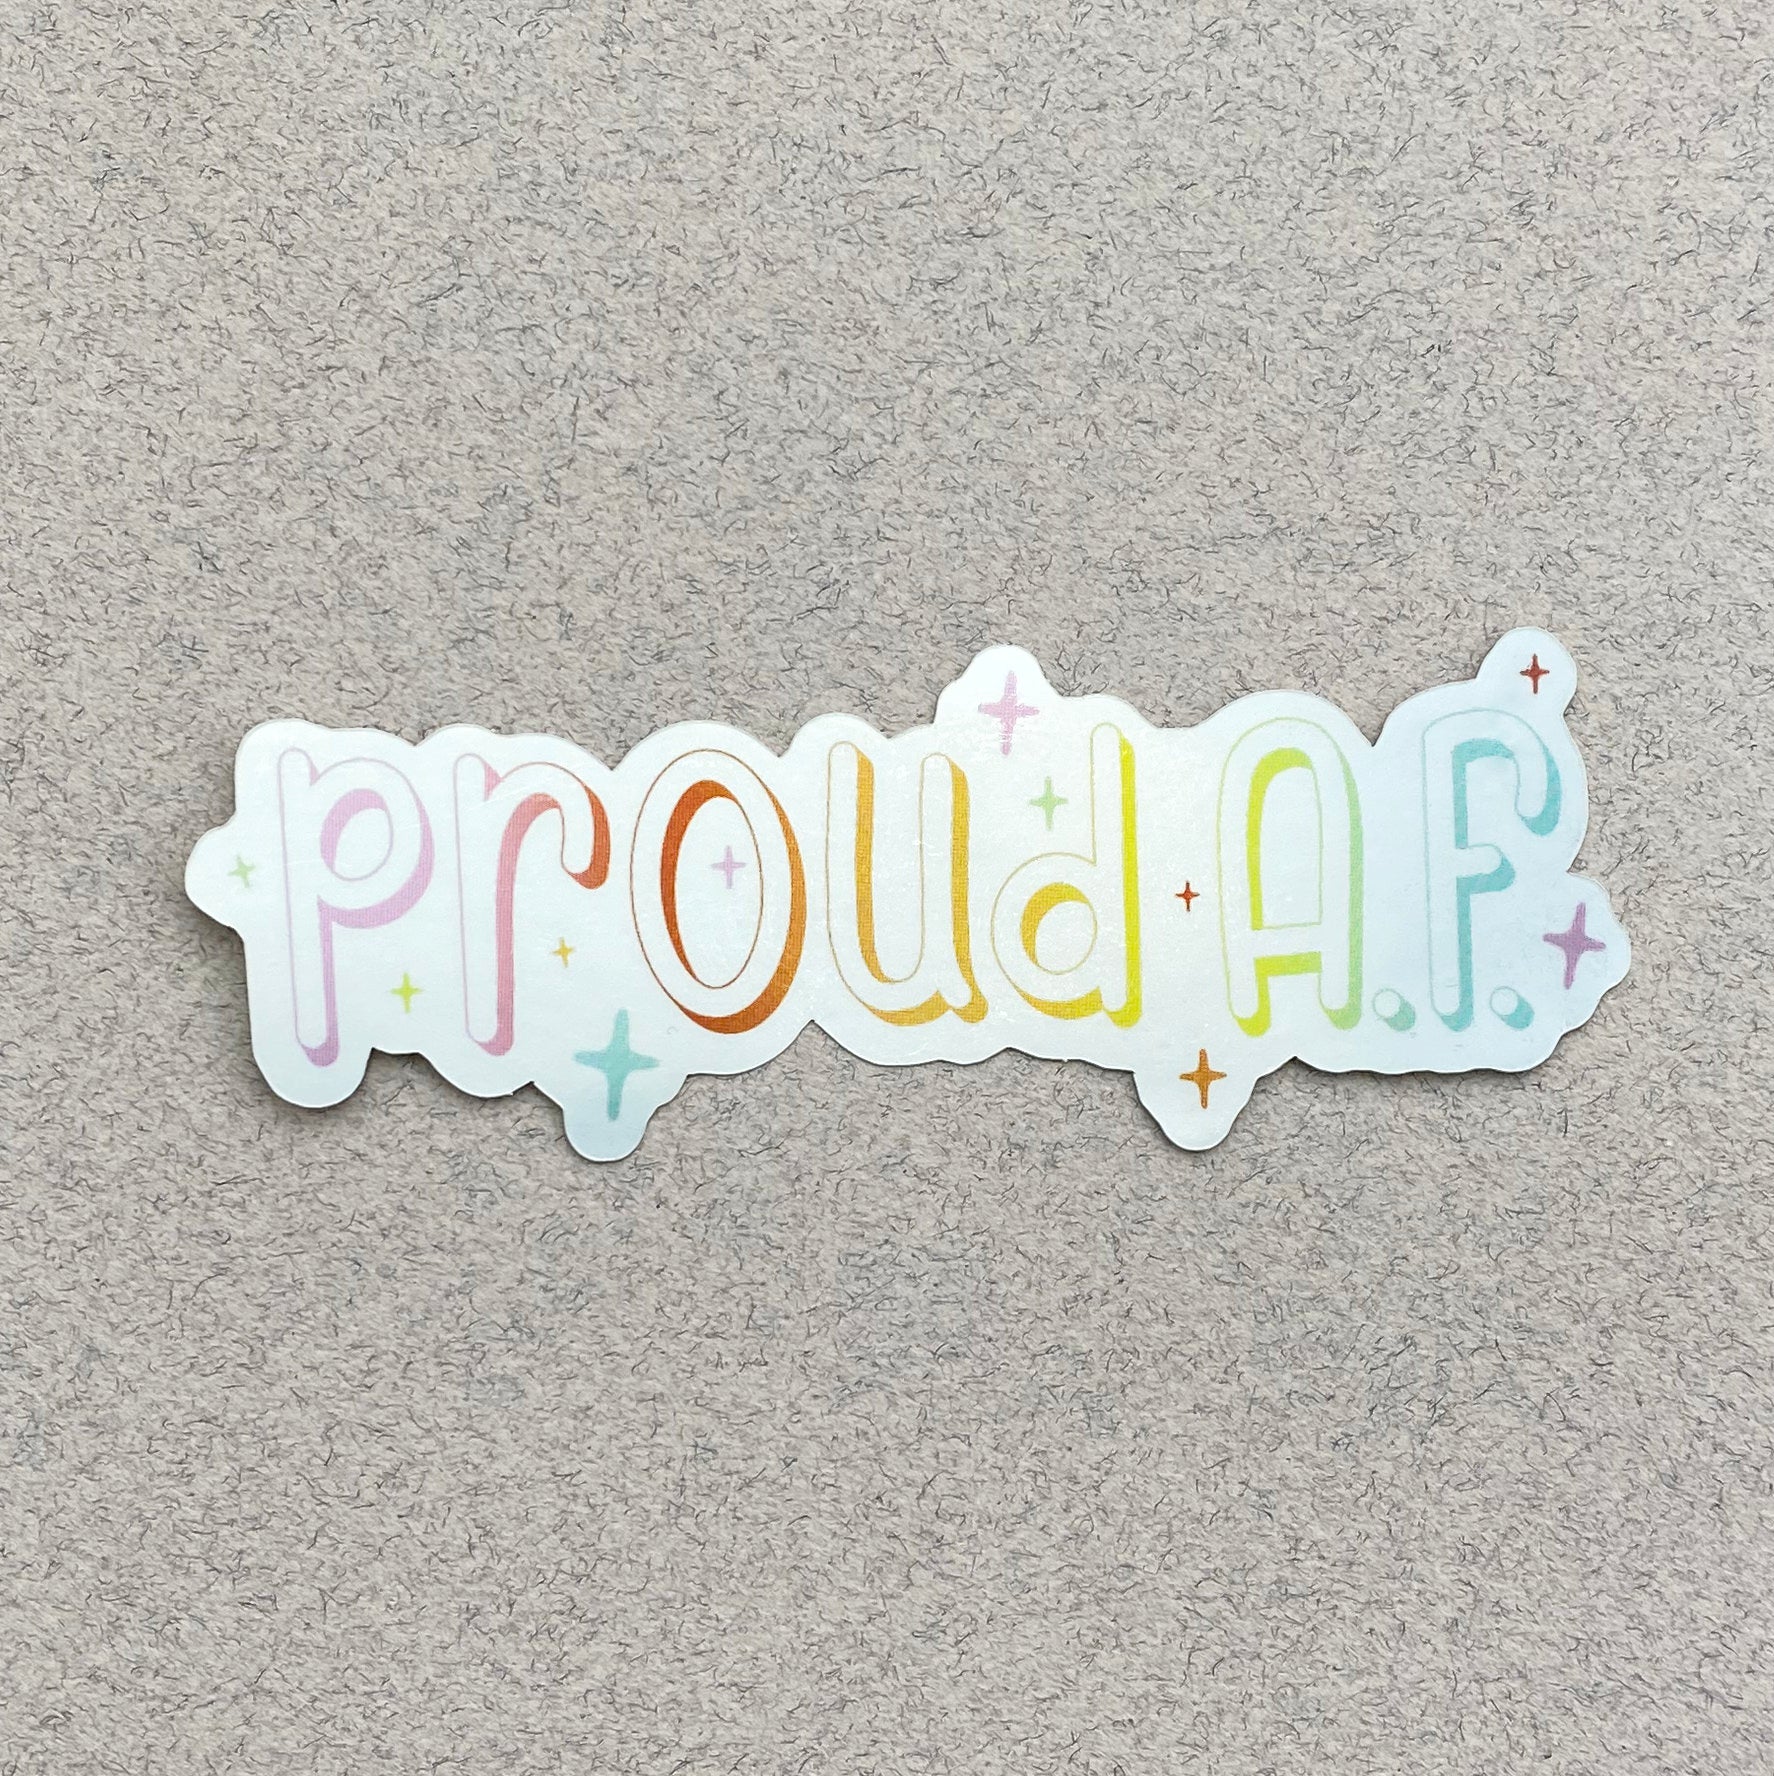 A metallic silver sticker against a varigated gray paper background. The sticker says "proud A.F." in a pastel rainbow gradient and is surrounded by sparkles.